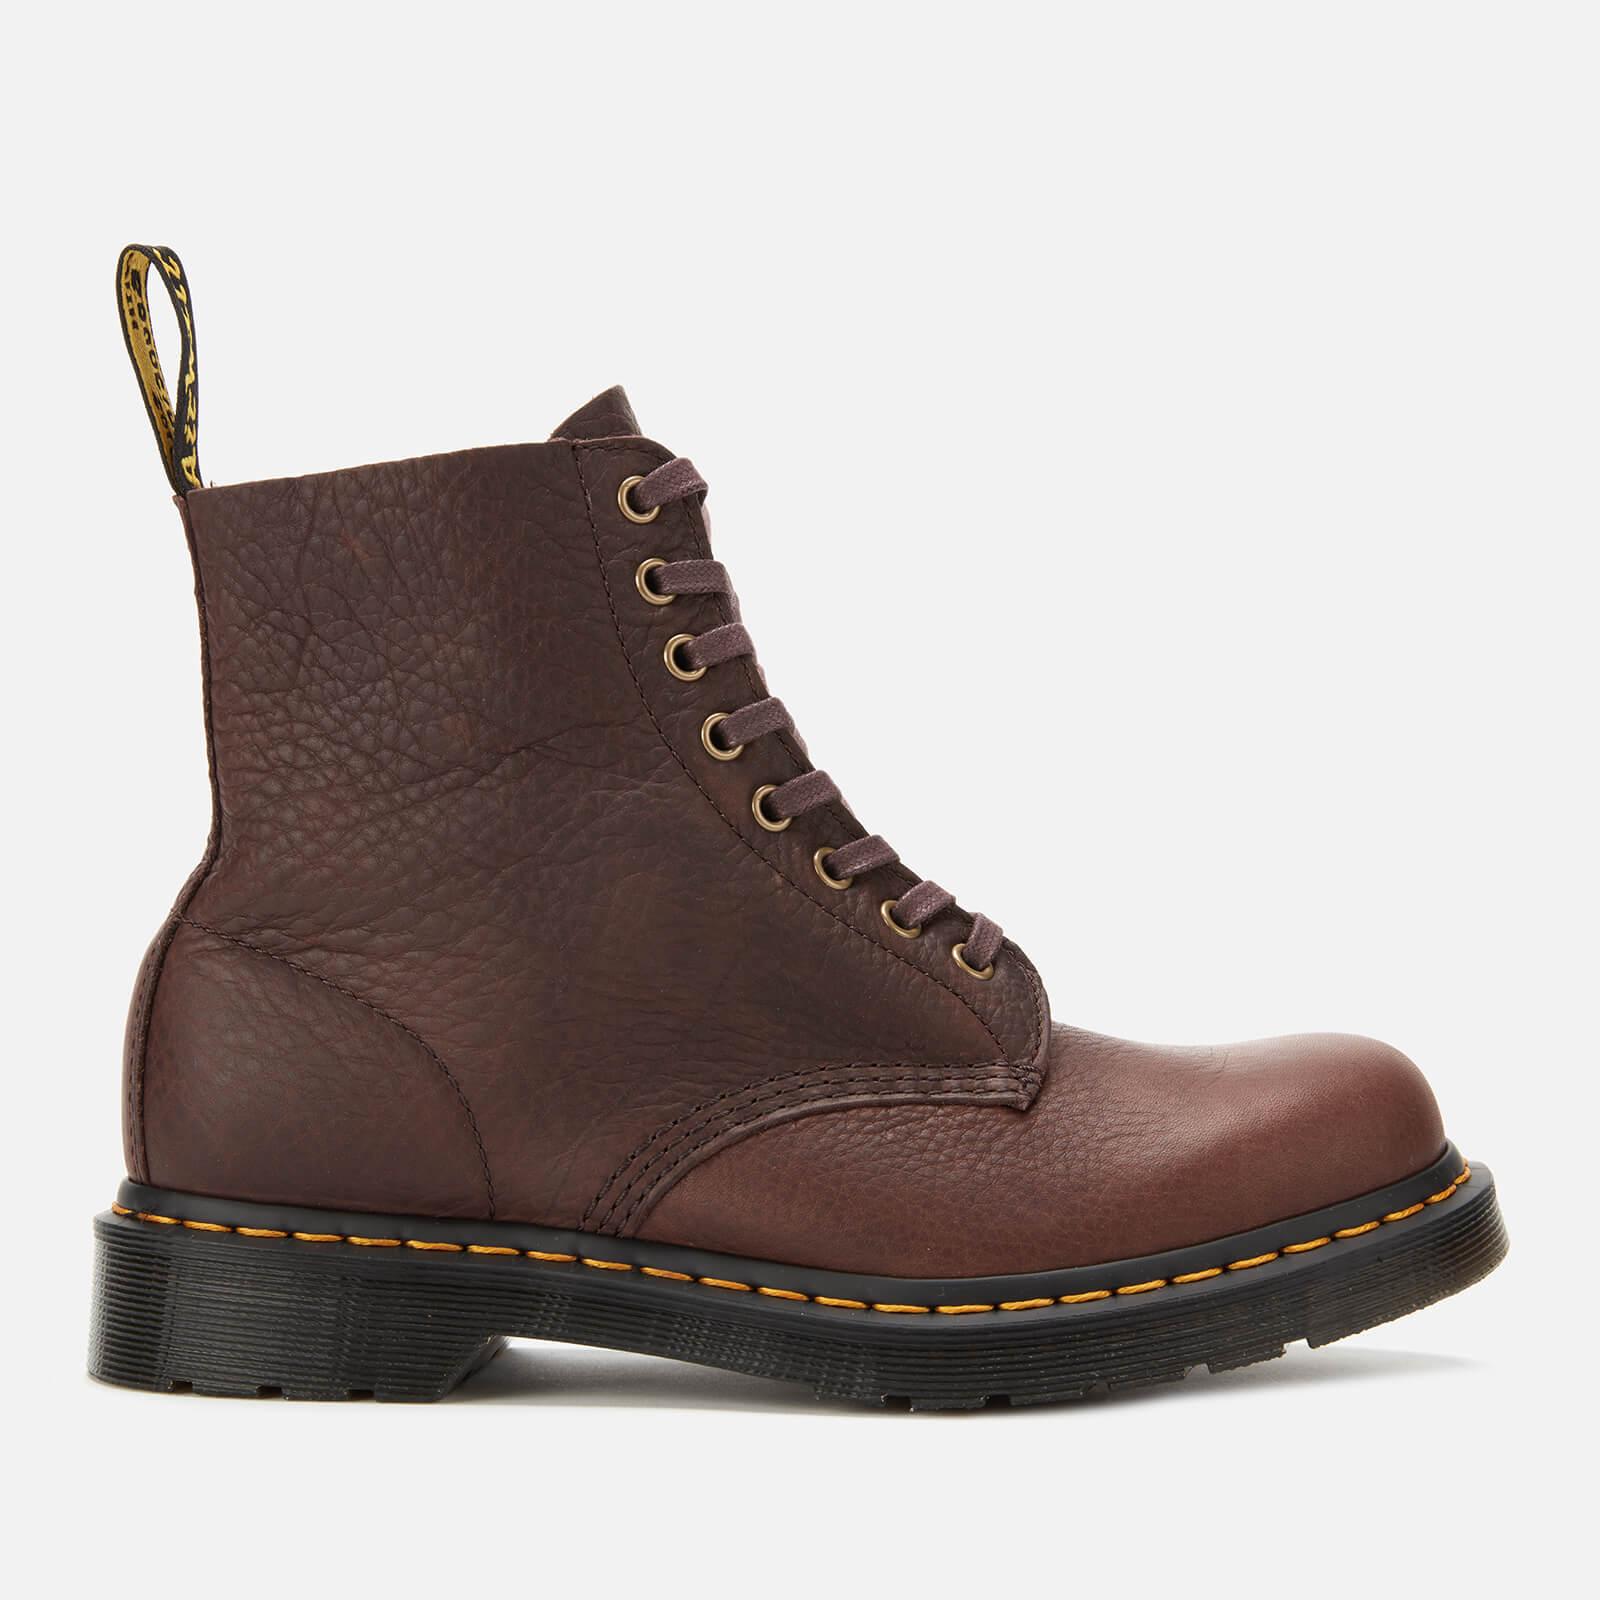 Dr. Martens 1460 Ambassador Soft Leather Pascal 8-eye Boots in Tan (Brown)  for Men - Save 49% - Lyst